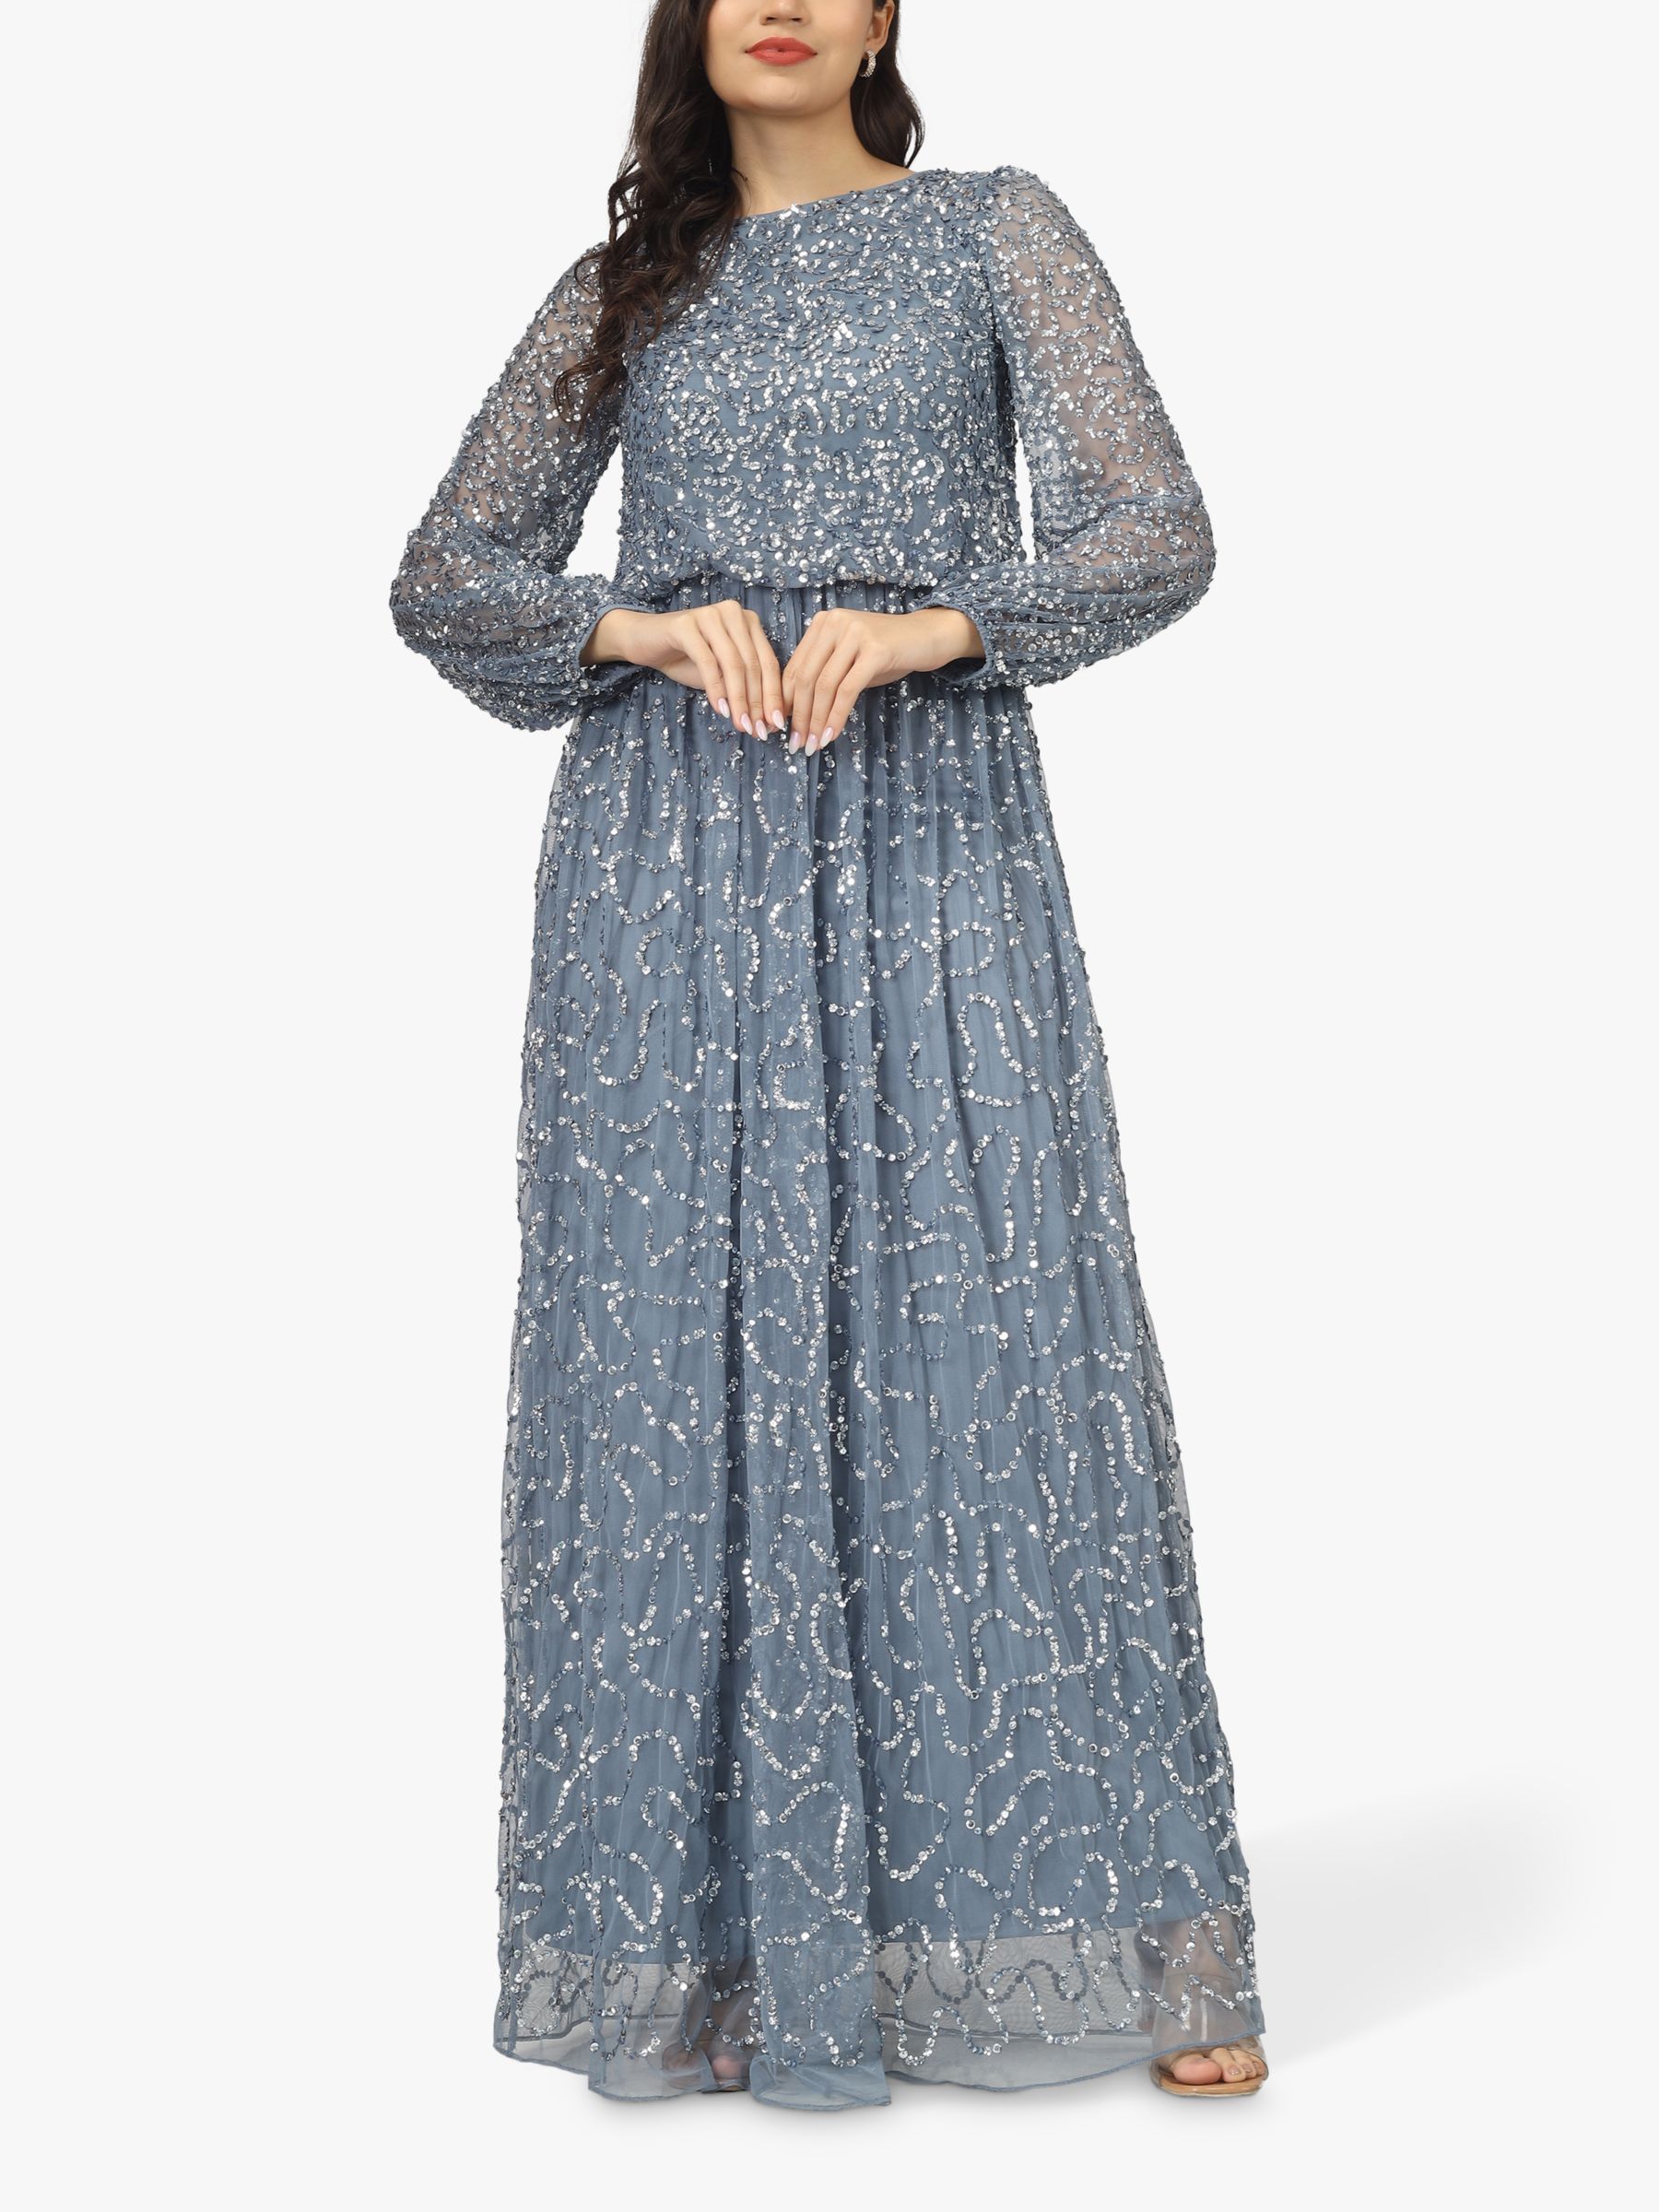 Buy Lace & Beads Melissa Embellished Maxi Dress, Dusty Blue Online at johnlewis.com